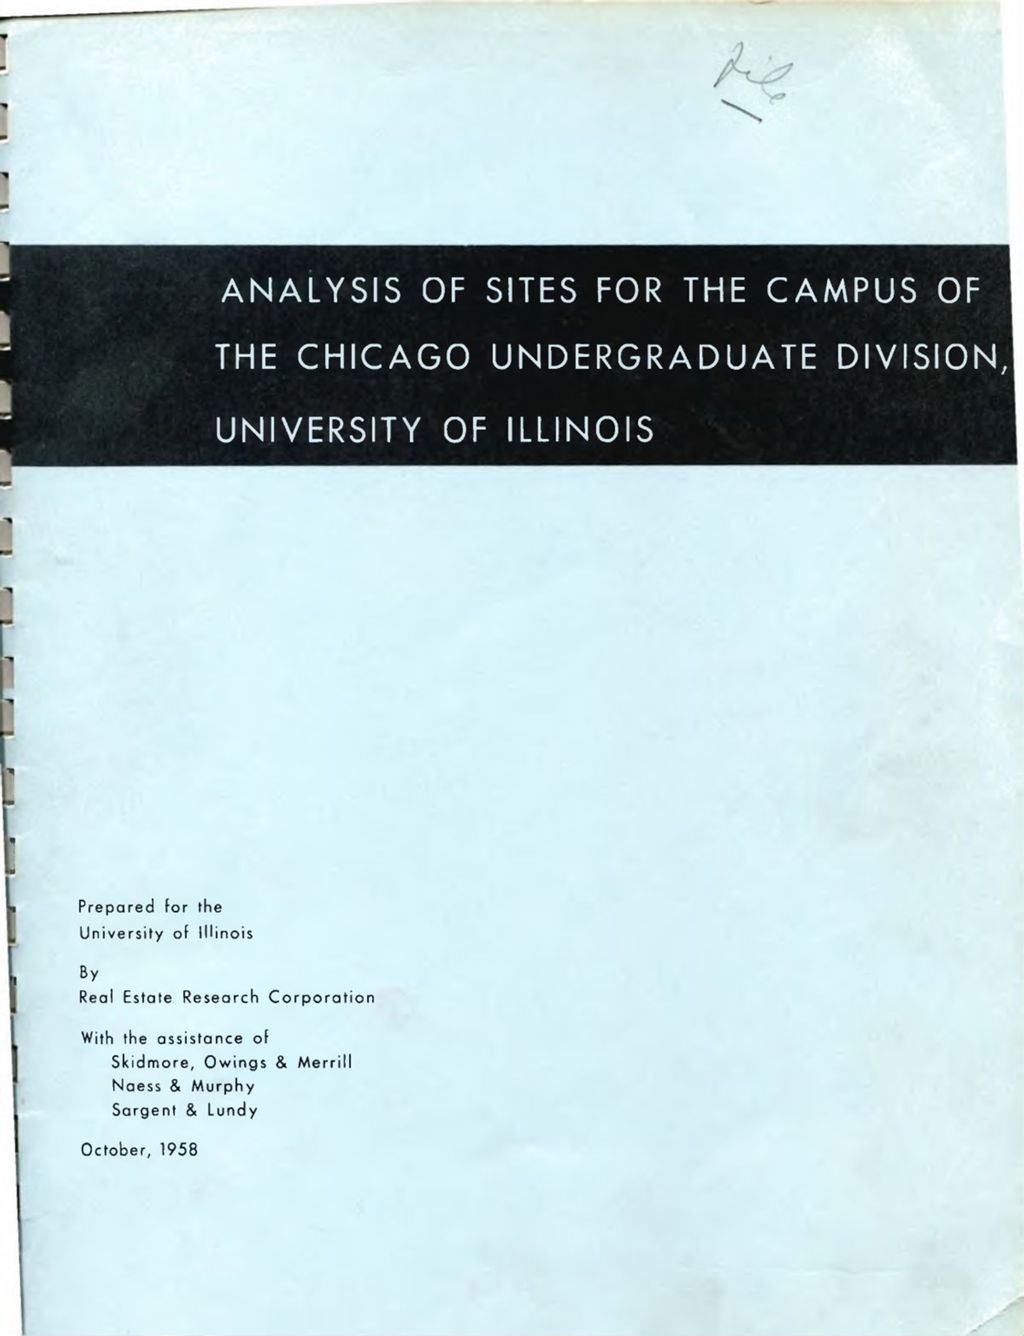 Analysis of Sites for the Campus of the Chicago Undergraduate Division, 1958